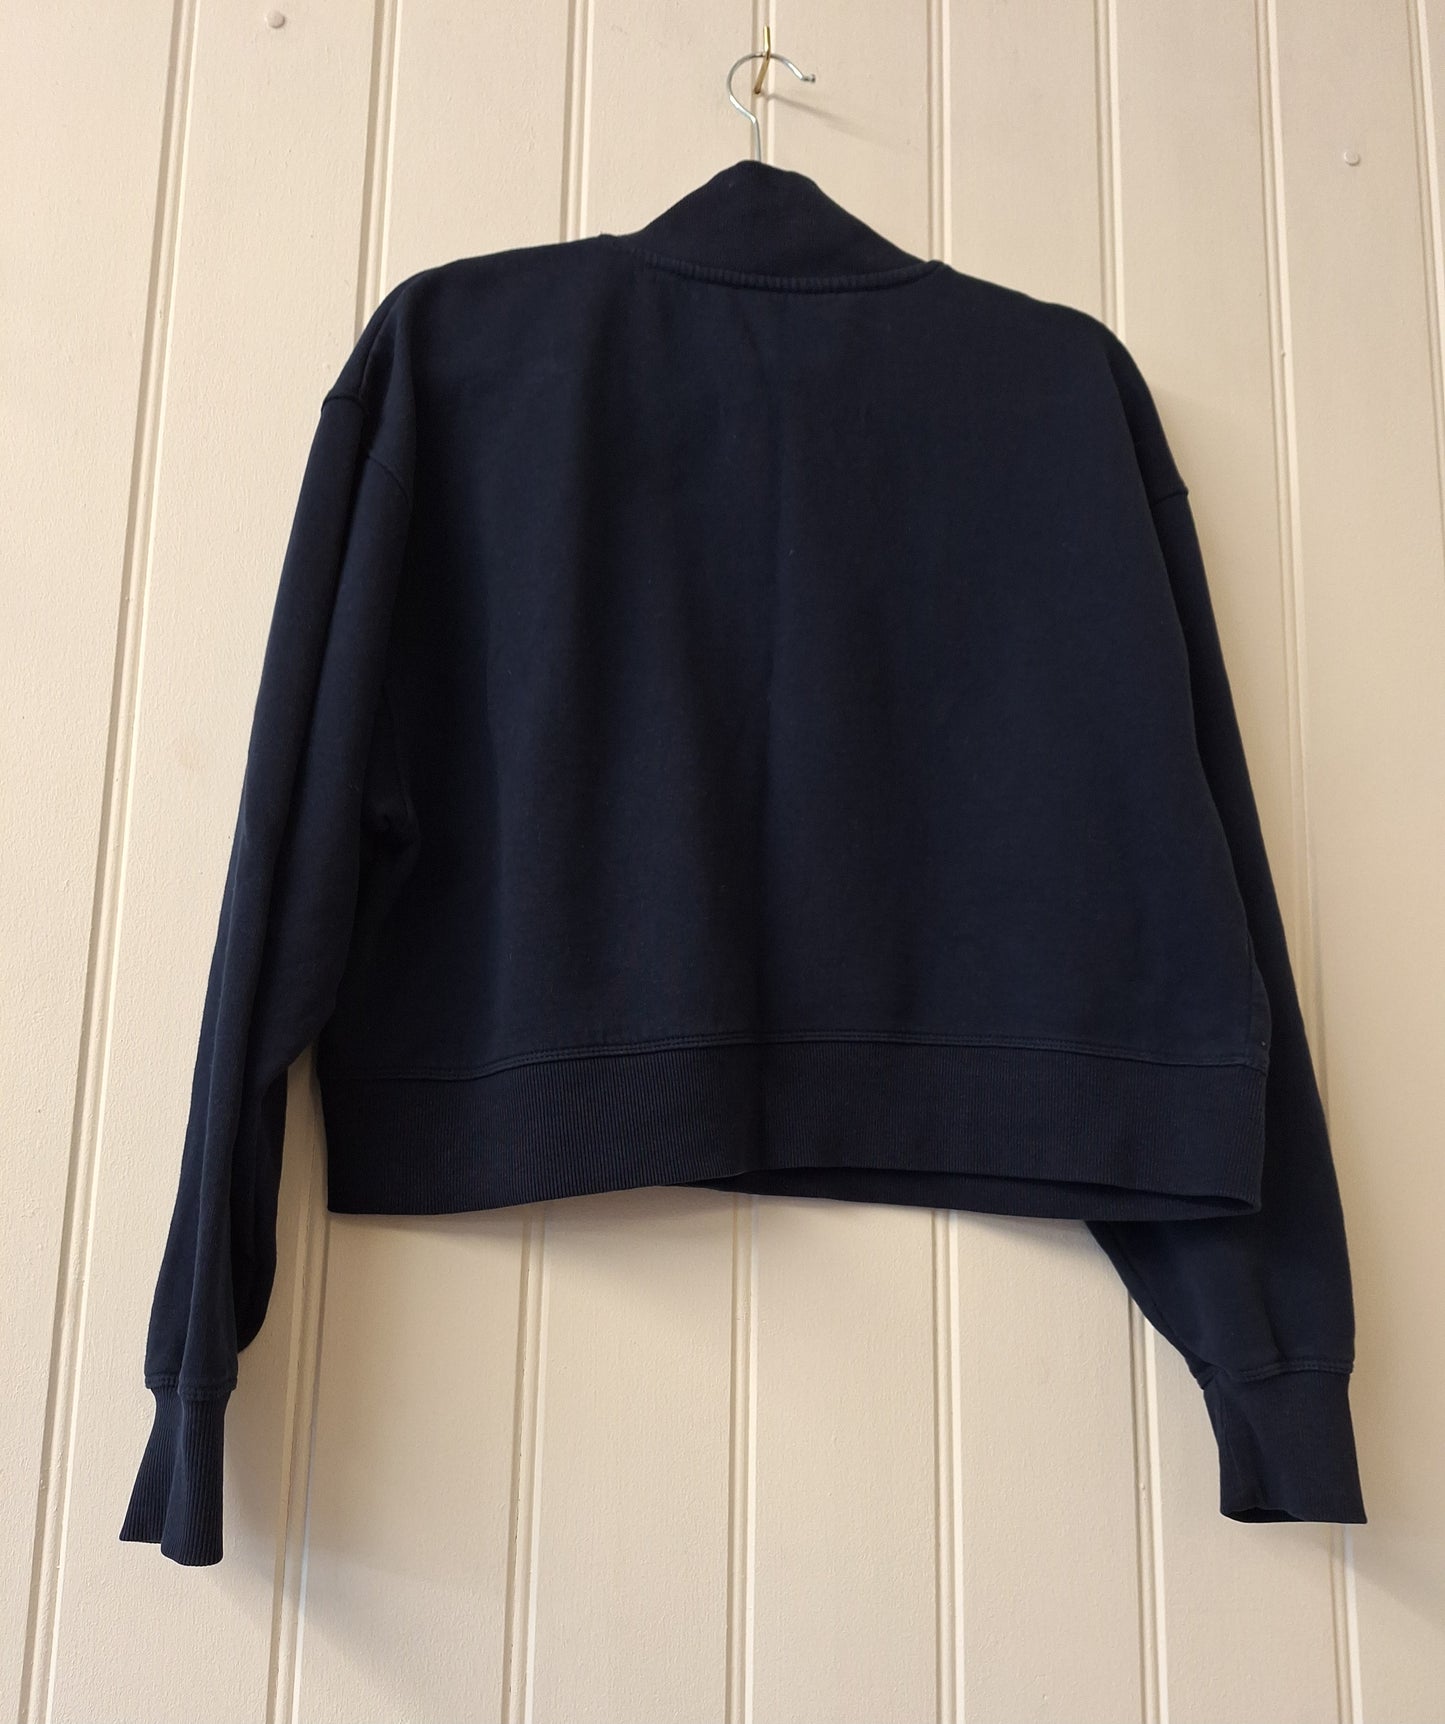 Goodmove by M & S navy sweat top 16